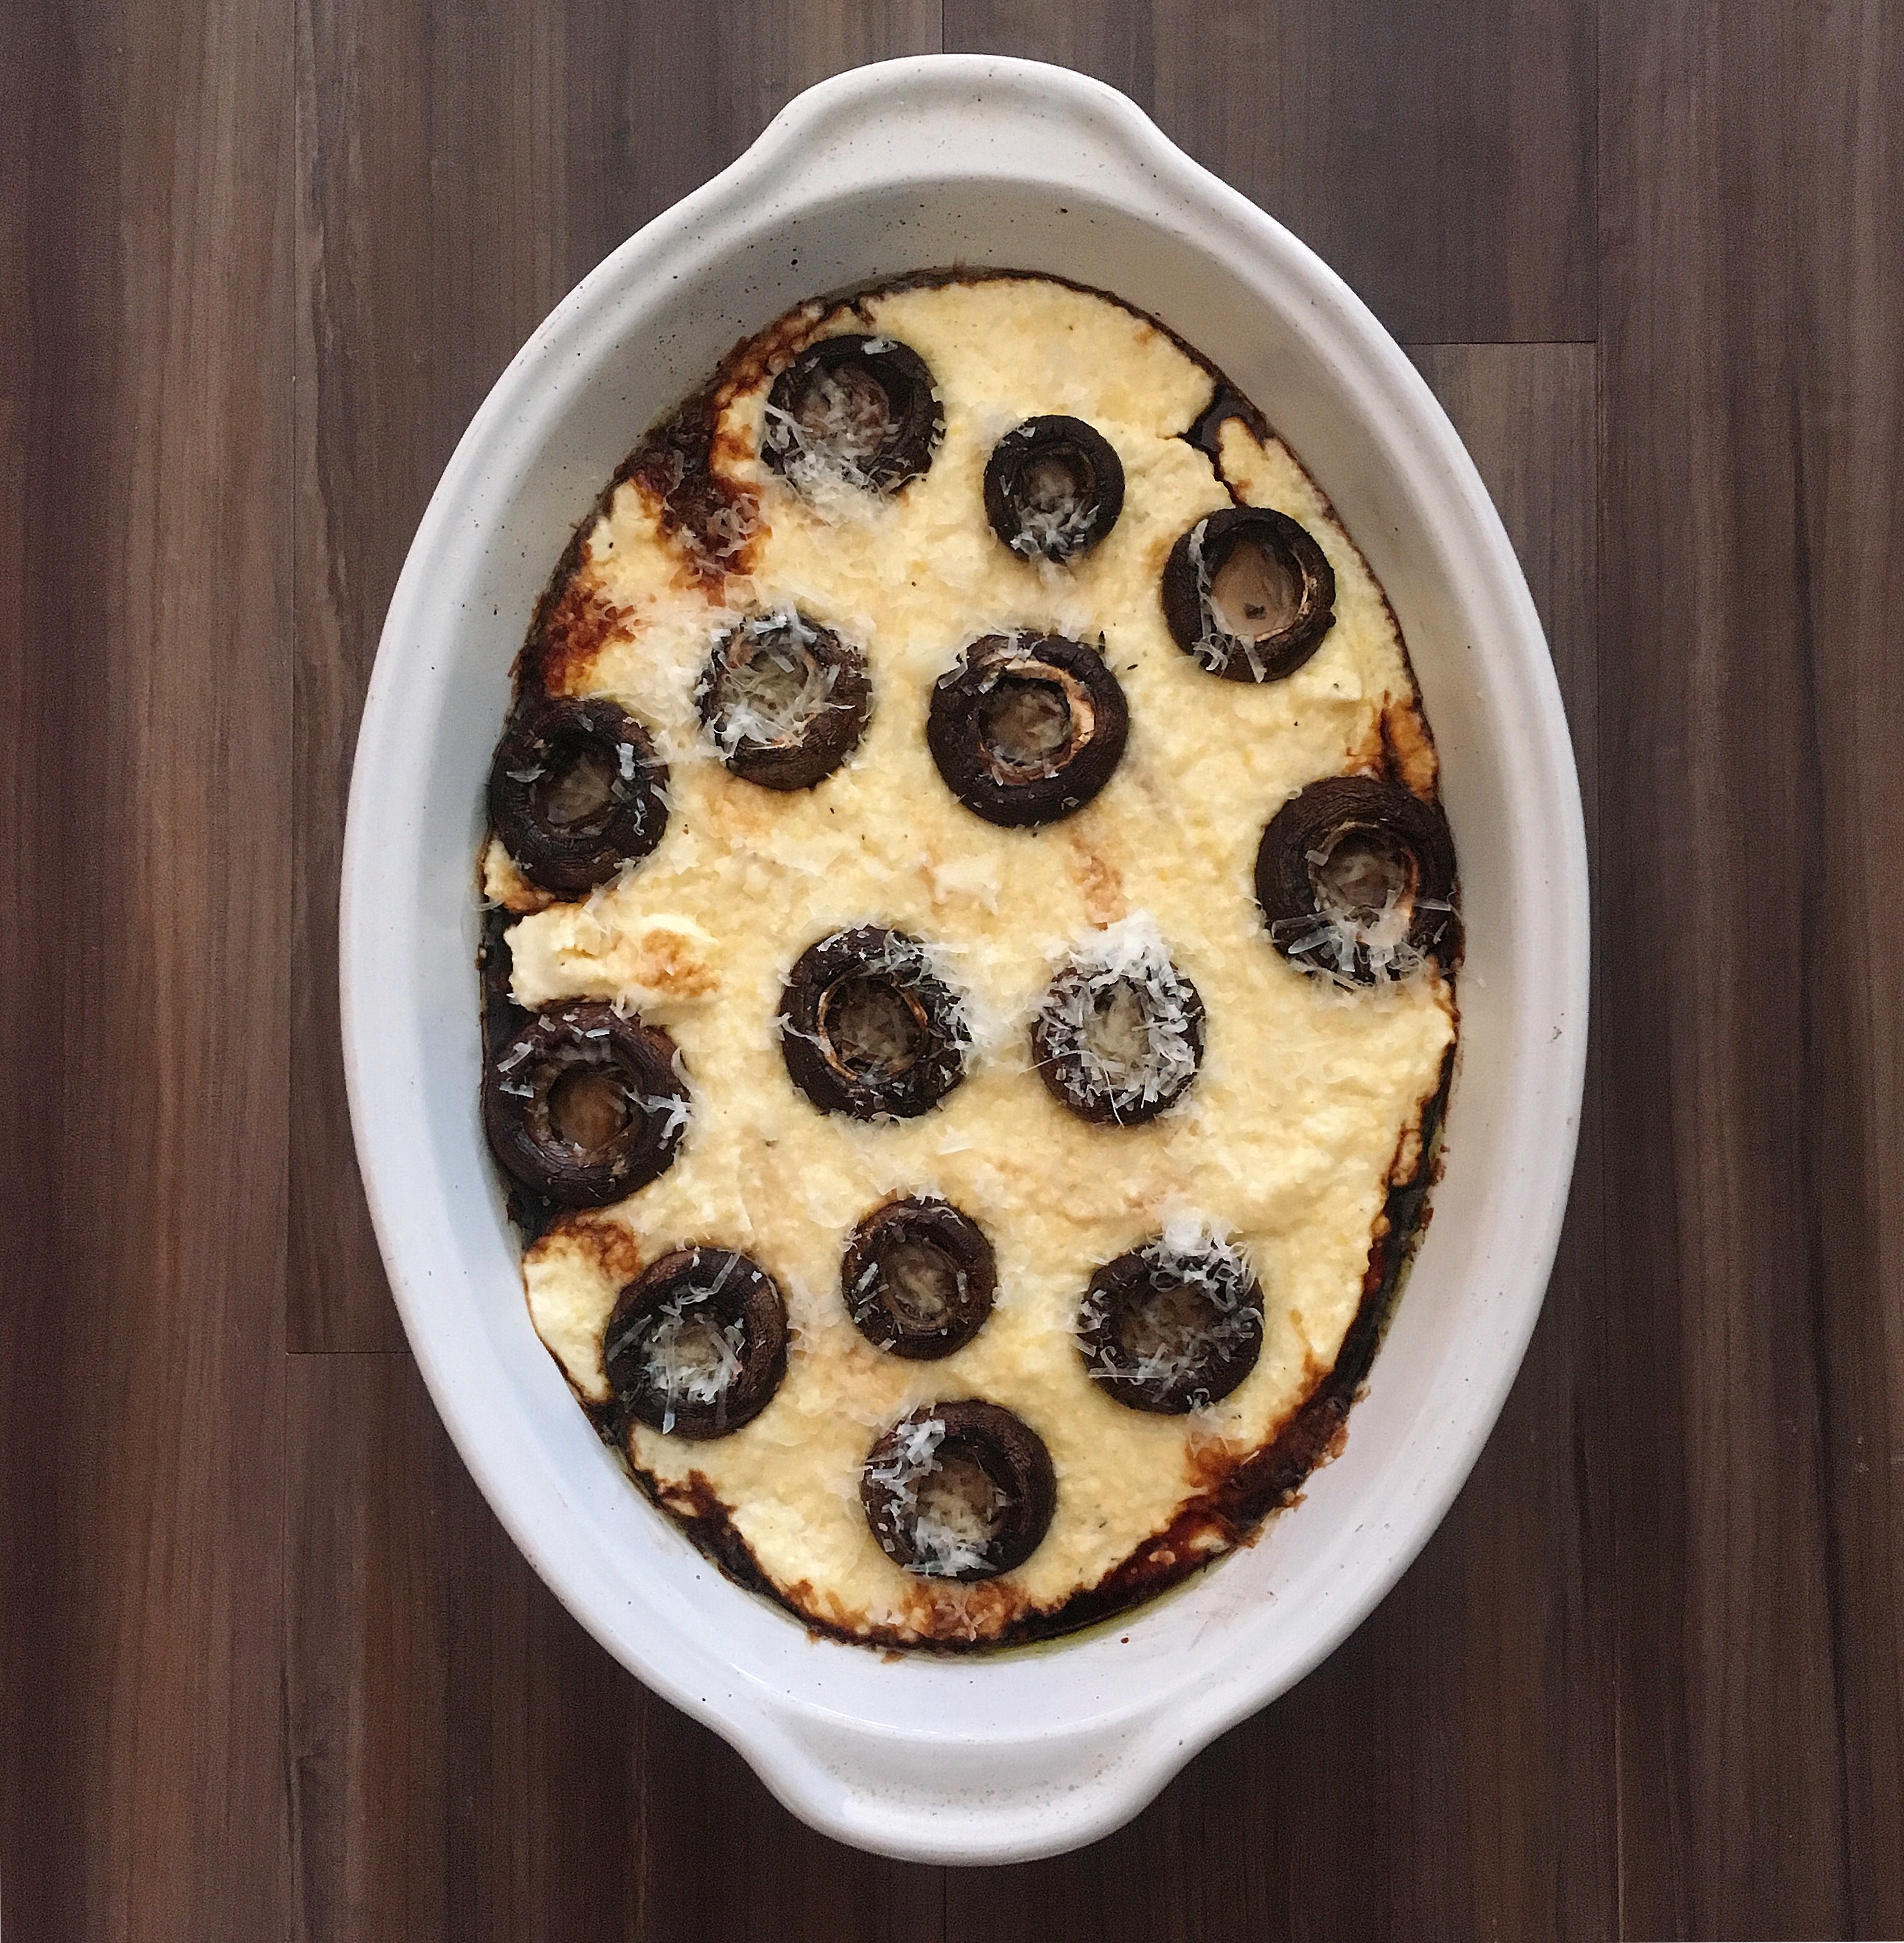 "Mushrooms roasted with balsamic vinegar are nestled in creamy, cheesy polenta in this bake that doubles as a vegetarian main dish or side," says LauraF.
                          